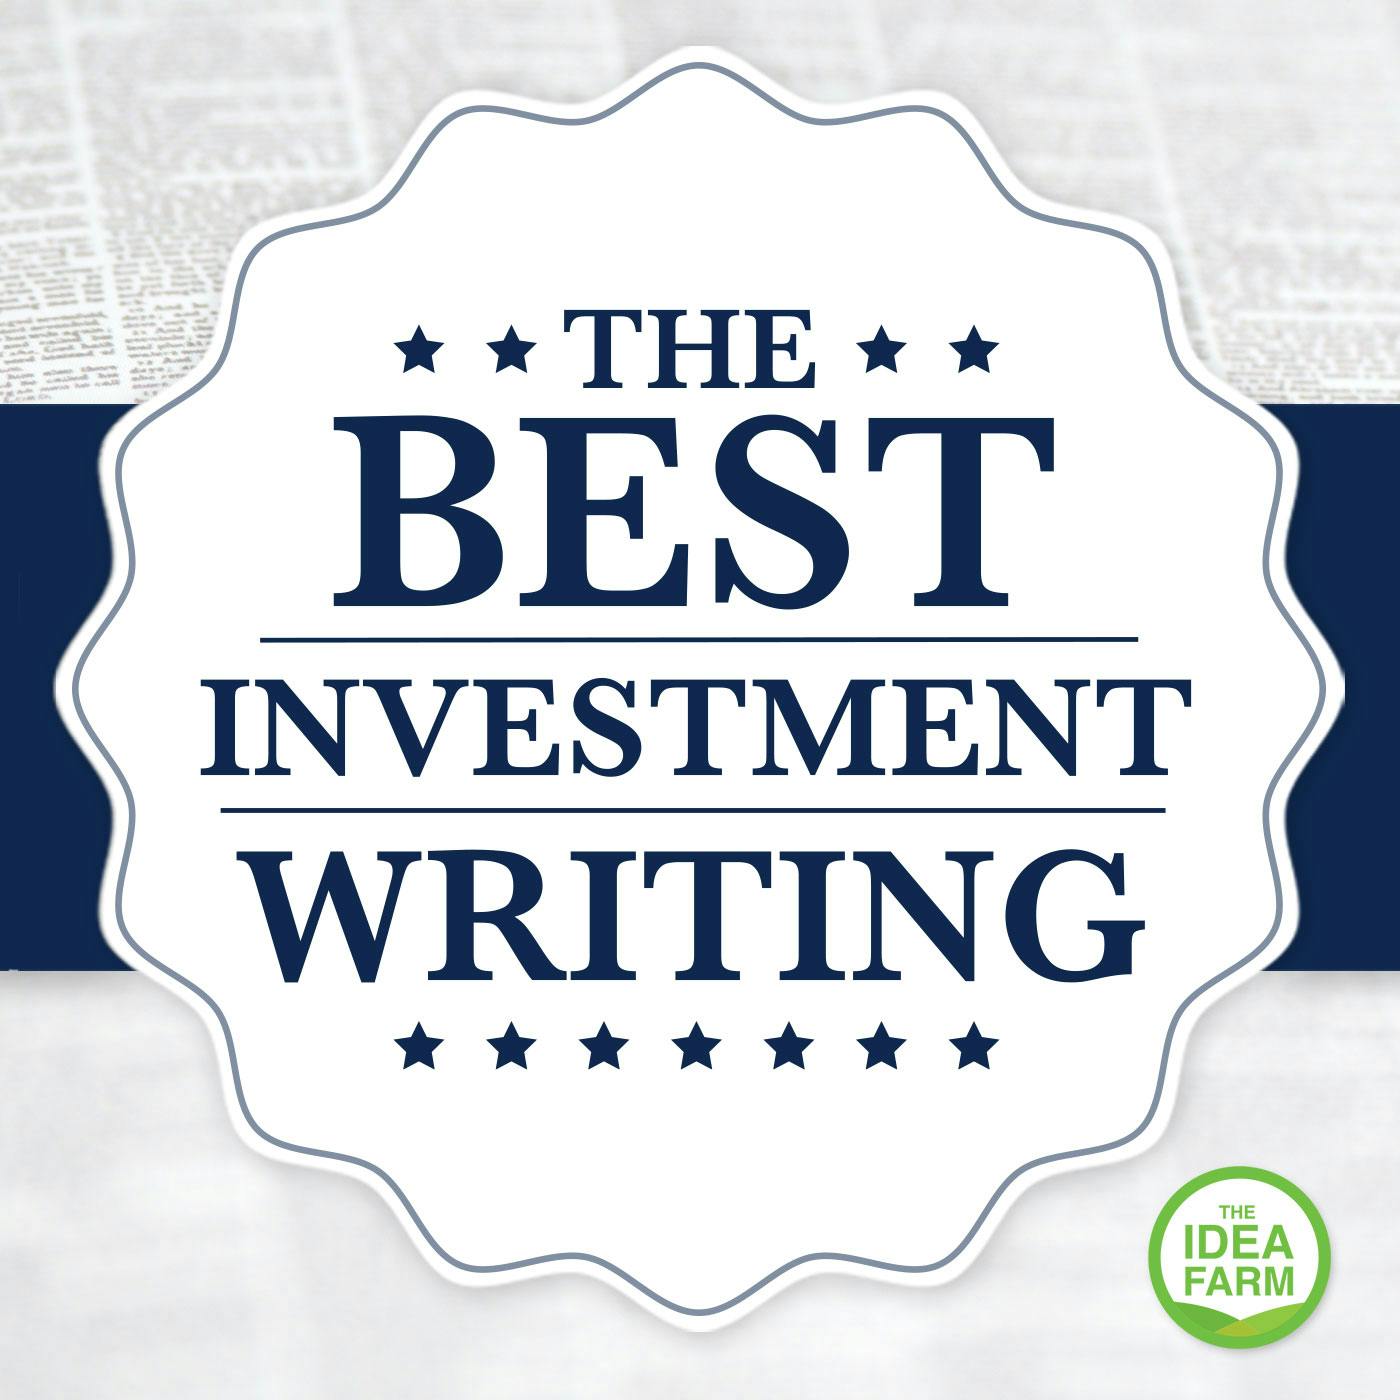 The Best Investment Writing Volume 5: Amie Ko, Research Affiliates - A Quick Survey of 